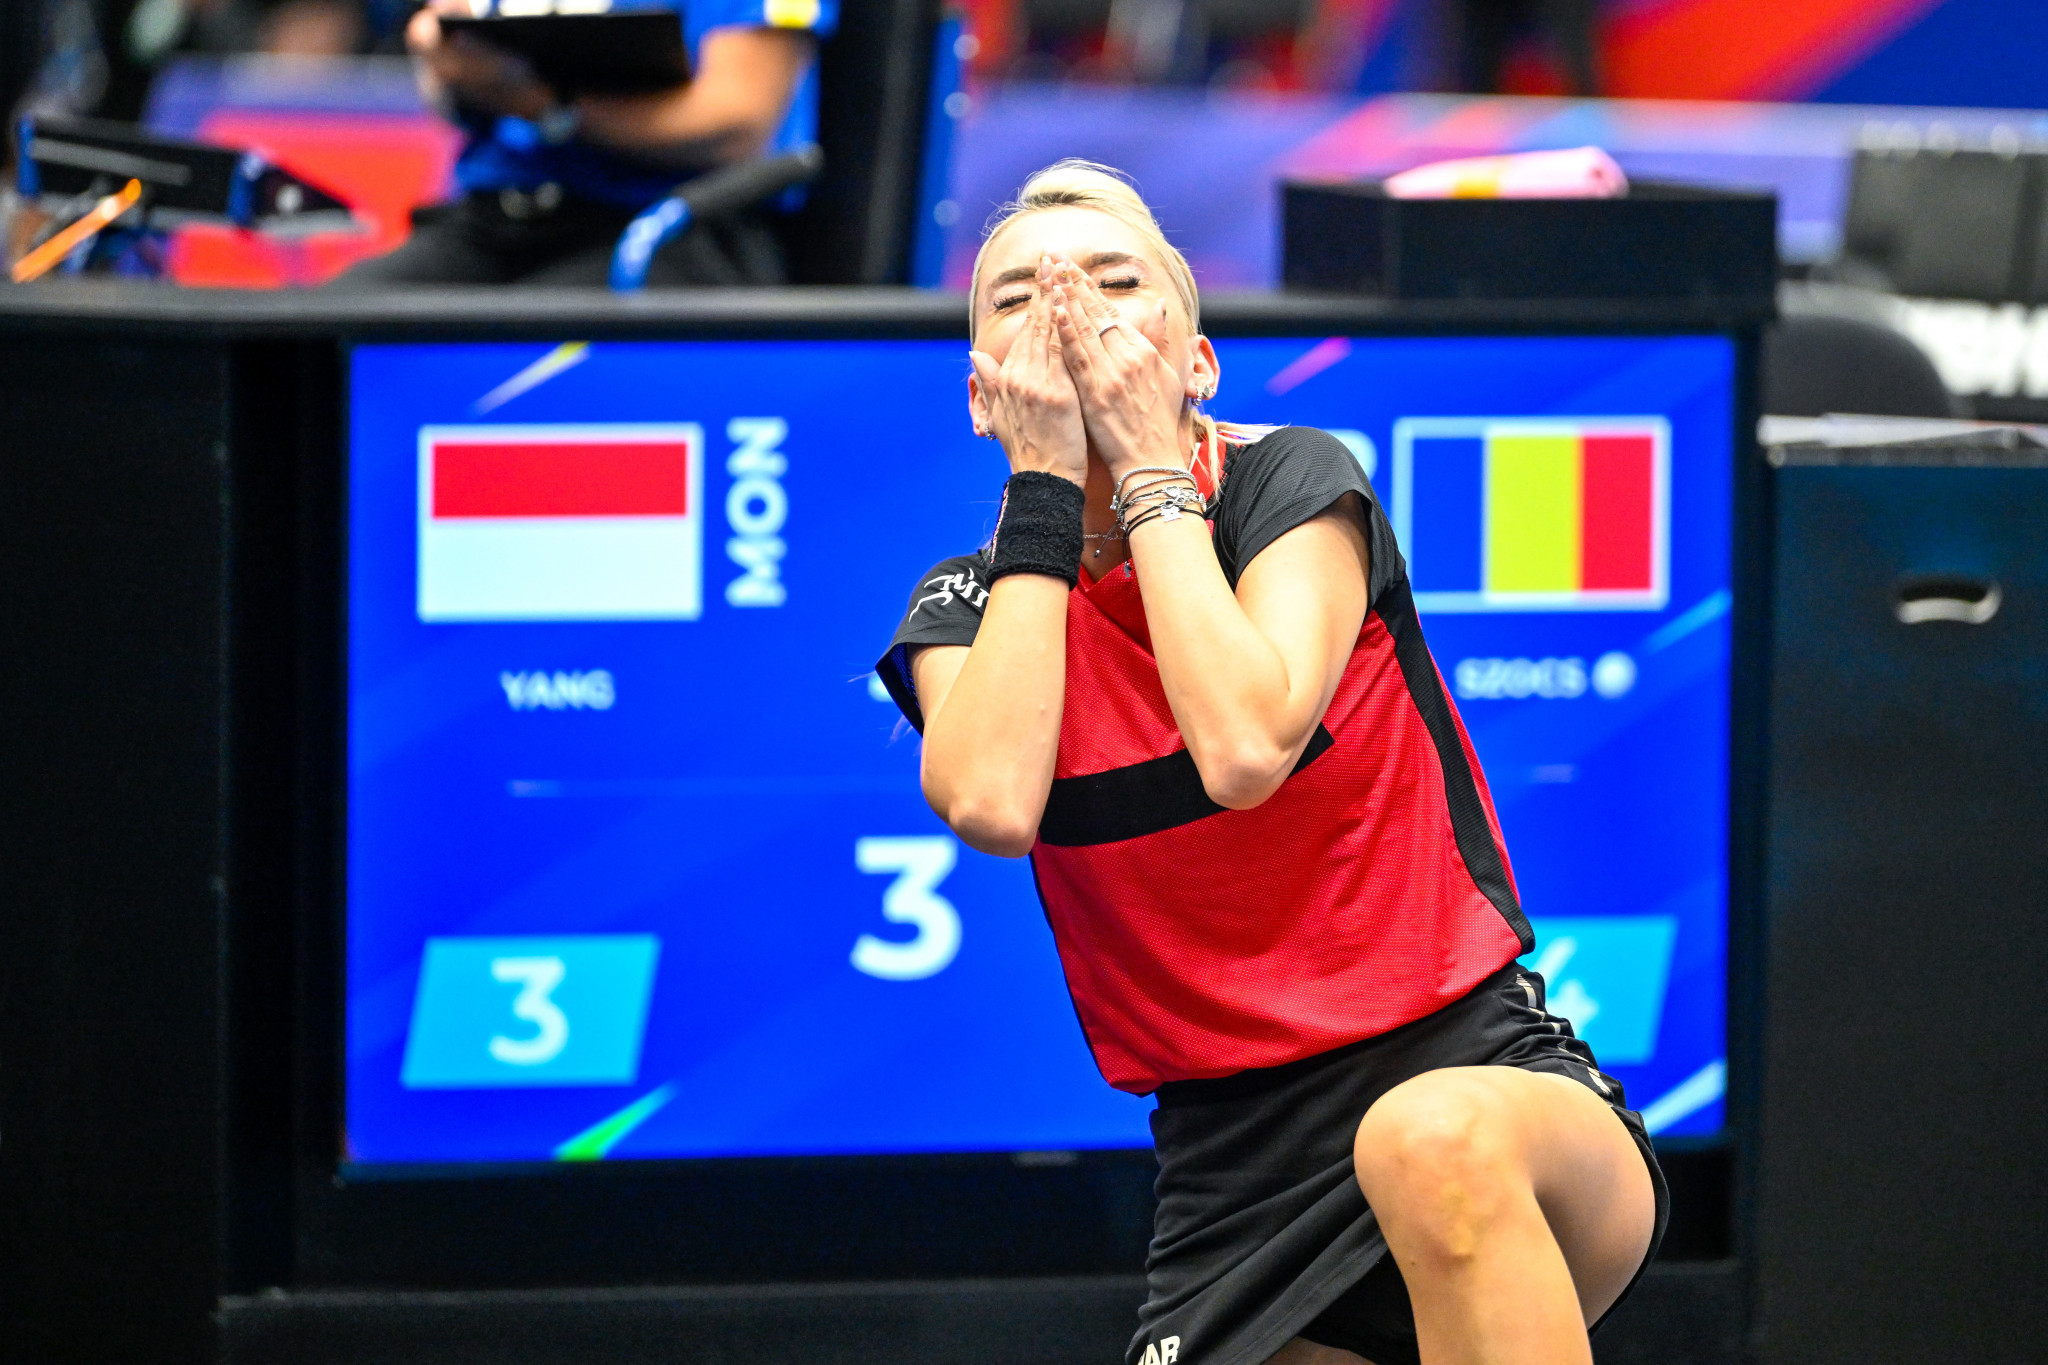 Romania's Bernadette Cynt Szocs triumphed in a seven-game women's singles table tennis final against Monaco's Xiaoxin Yang, coming from 3-1 behind to win gold ©Kraków-Małopolska 2023